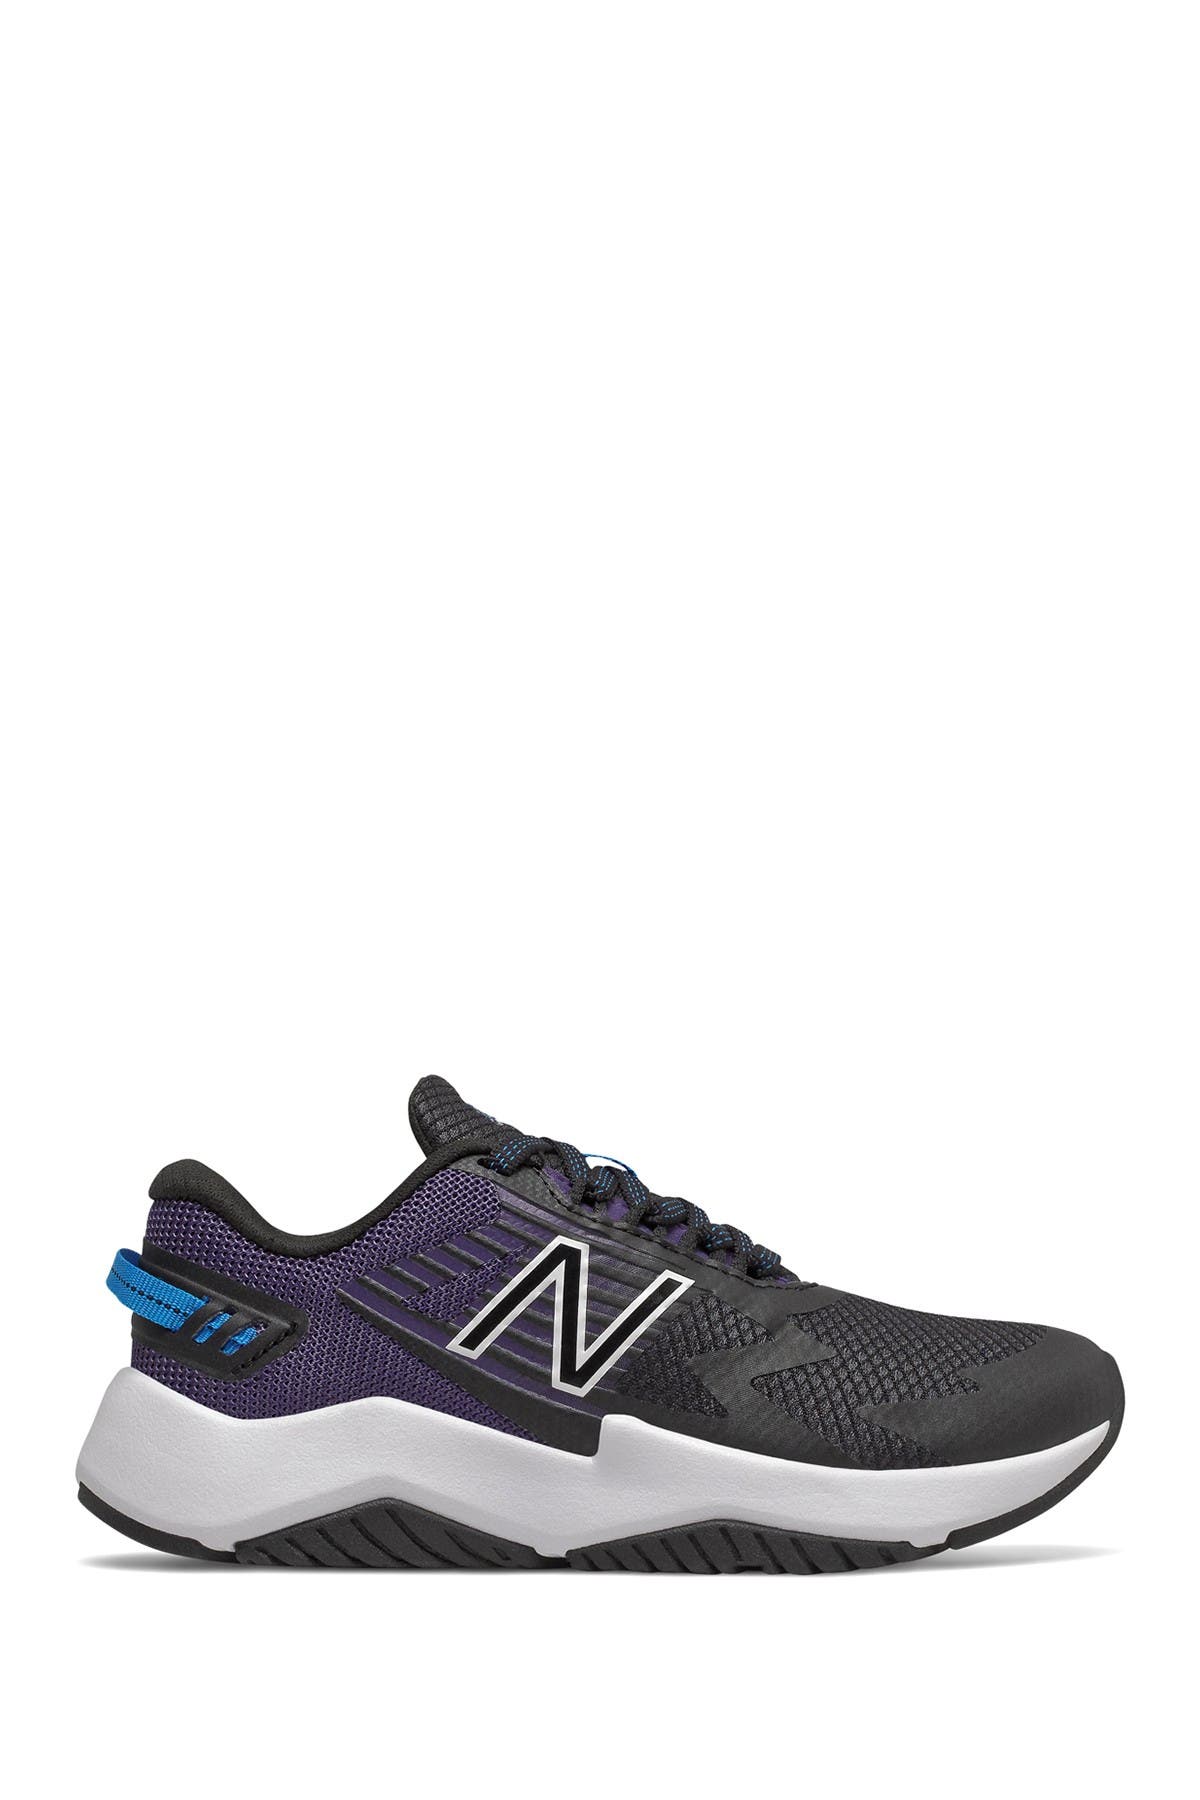 boys athletic shoes clearance